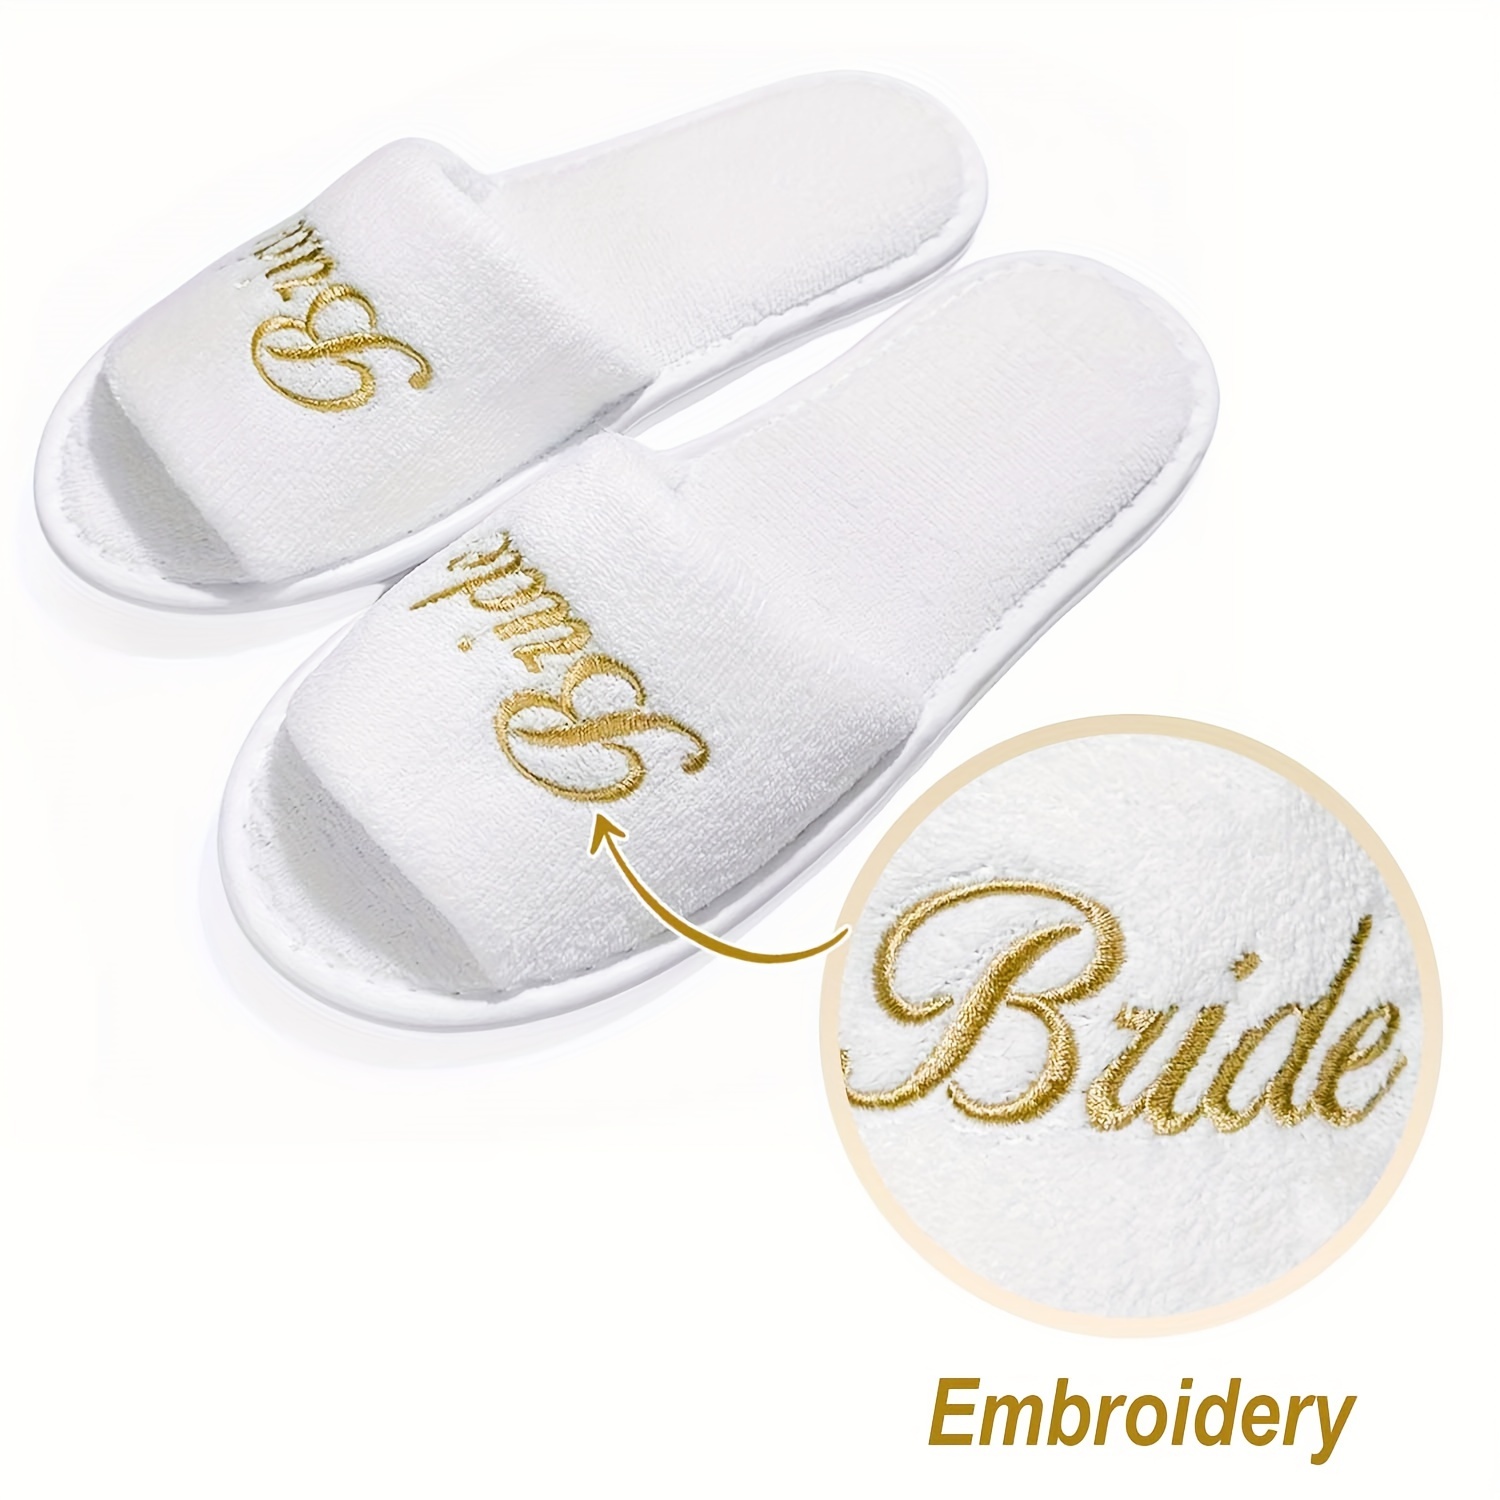 

Bridal Party Slippers Set, Open-toe With Golden Embroidery, Lightweight Plush Cozy Flats, Non-slip Soft Sole For Bride & Bridesmaid, Wedding Party Guests Home Slip On Shoes